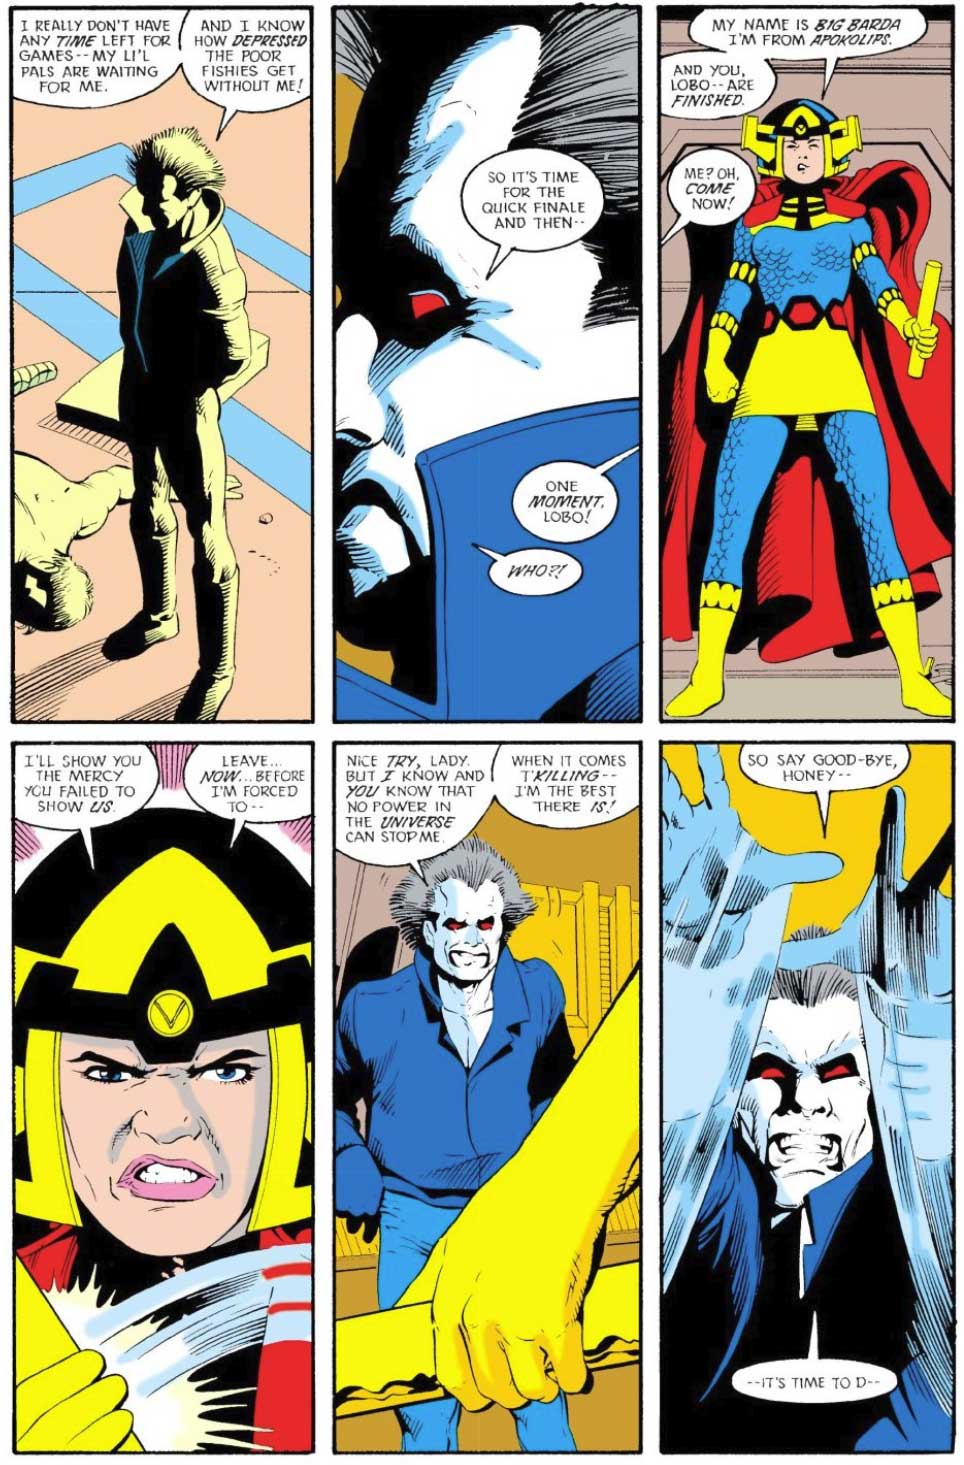 Justice League International #18 by Keith Giffen, JM DeMatteis, Kevin Maguire, and Al Gordon